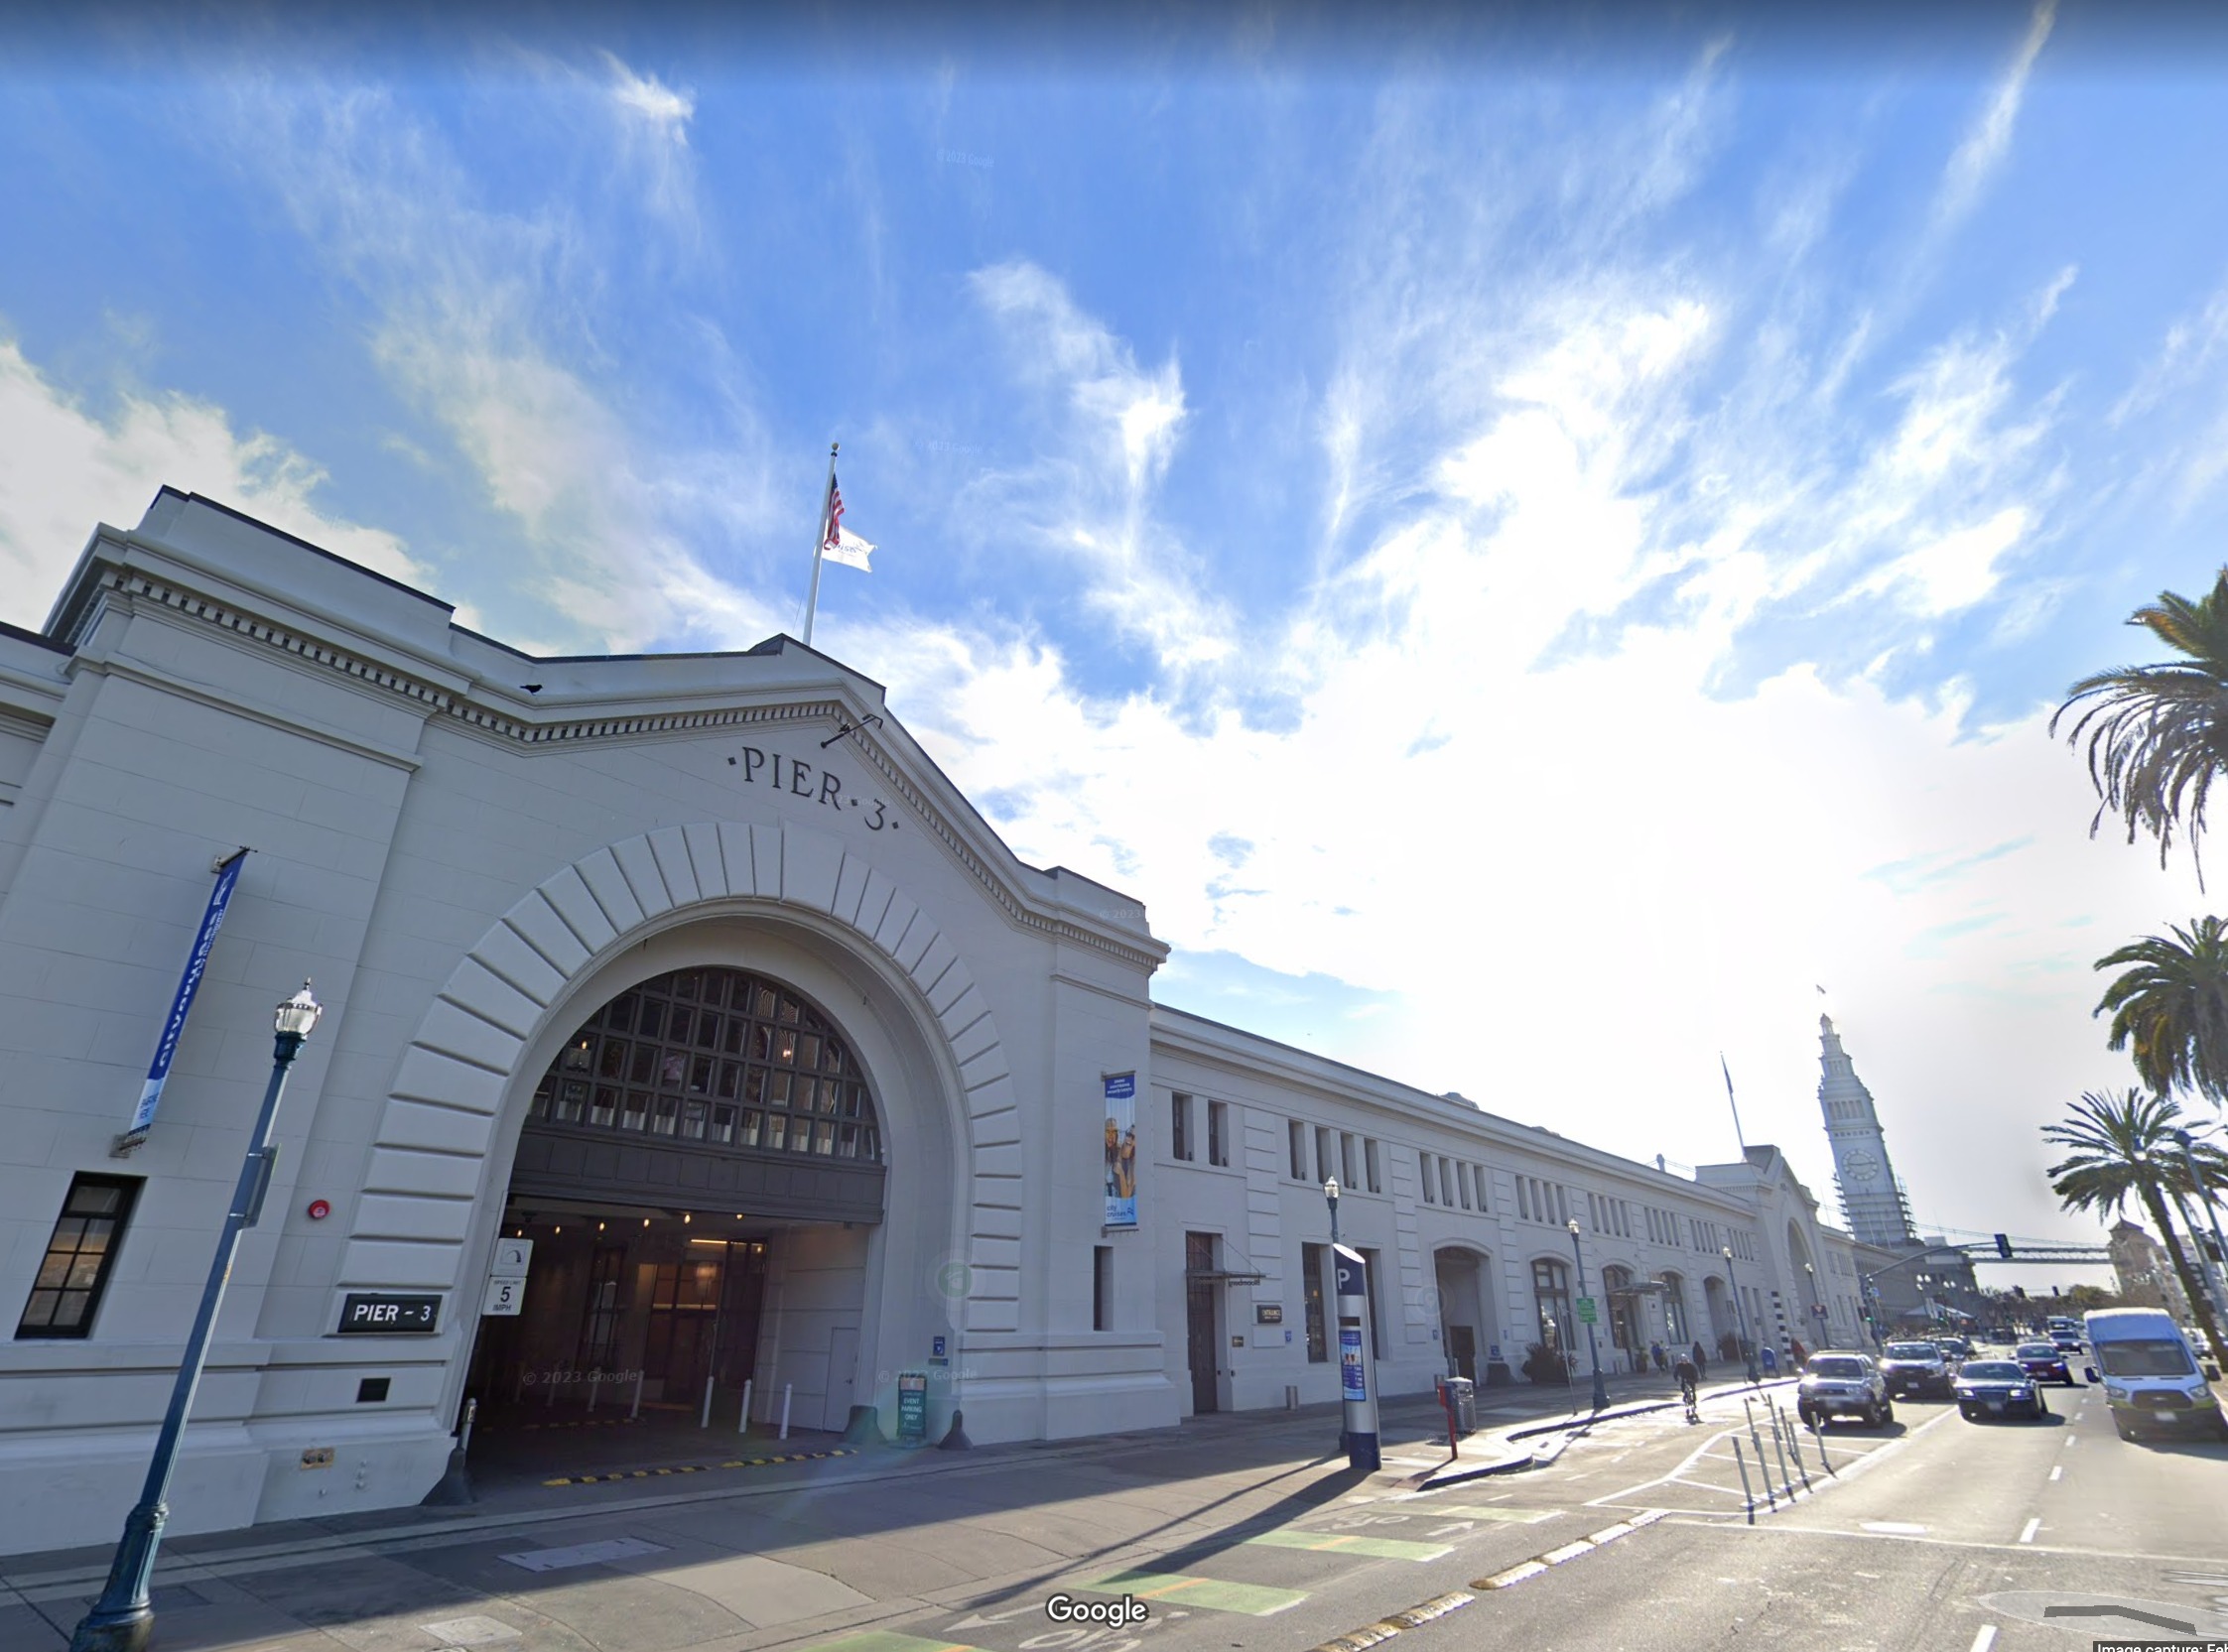 A Google Street View image from February 2023 captures Pier 3 on The Embarcadero in San Francisco.